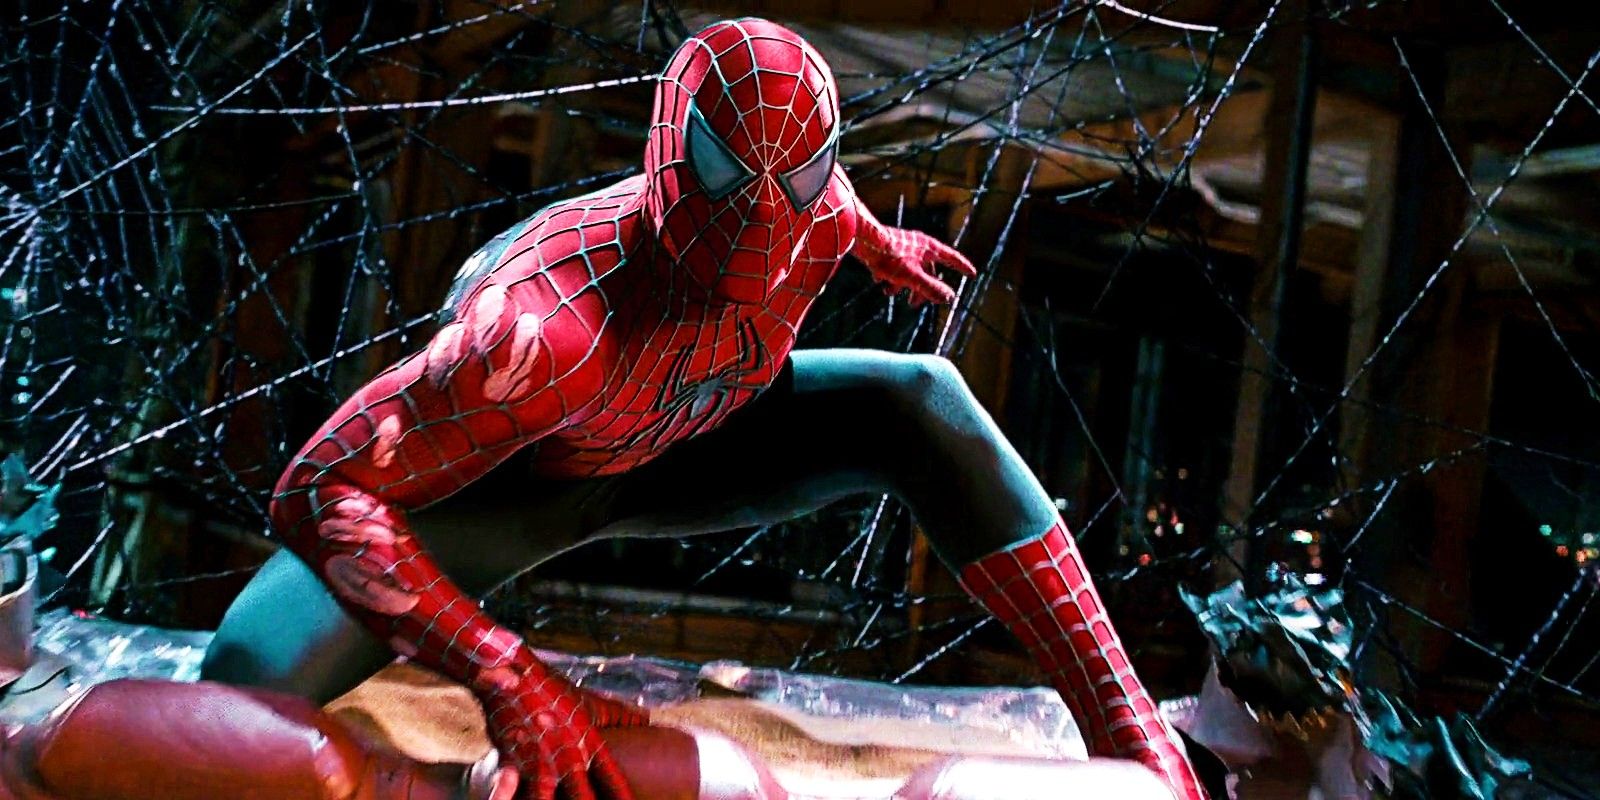 Tobey Maguire in the superhero pose as Spider-Man in Spider-Man 3